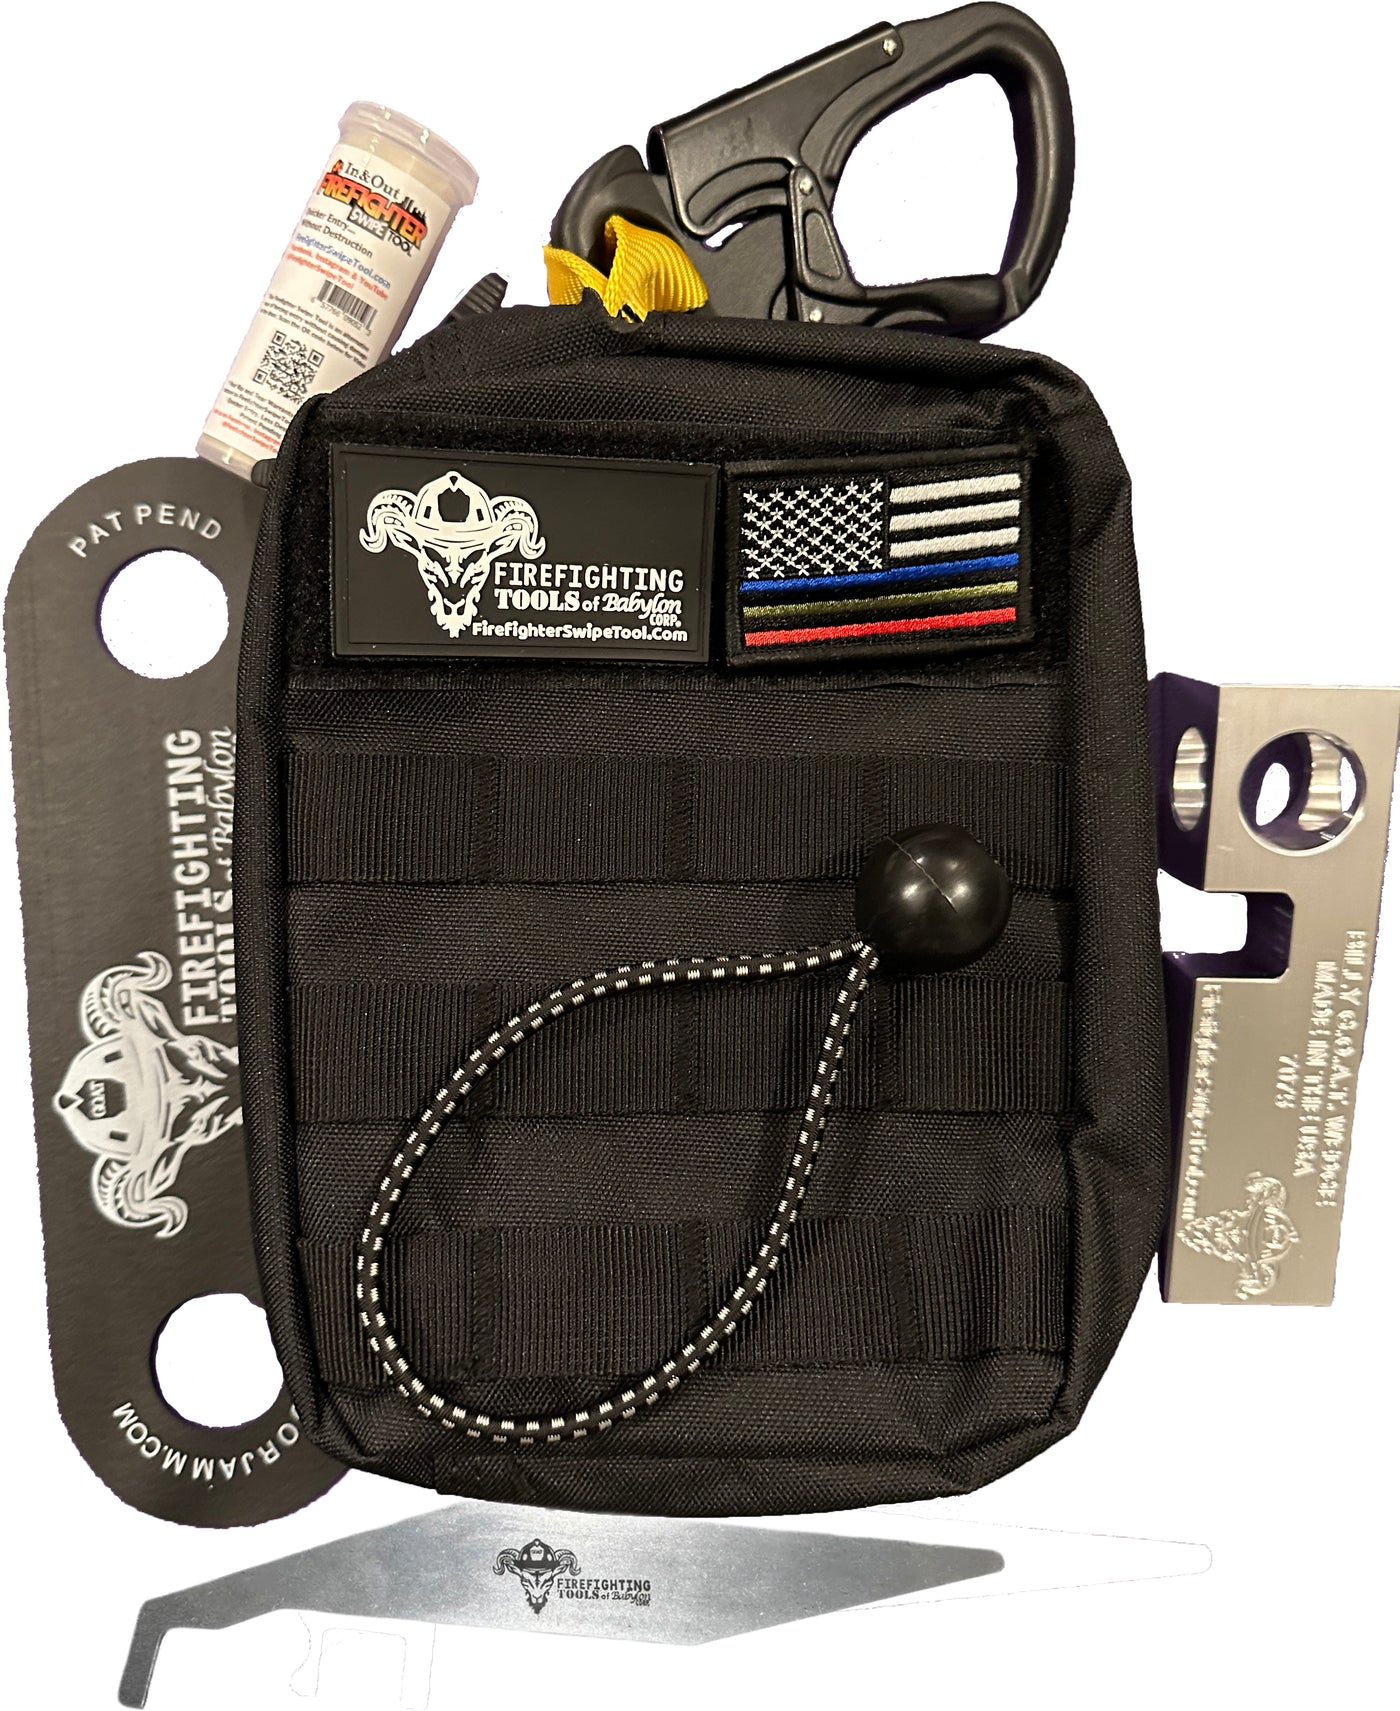 Ultimate Firefighter Tool Kit - Webbing and Tool Kit